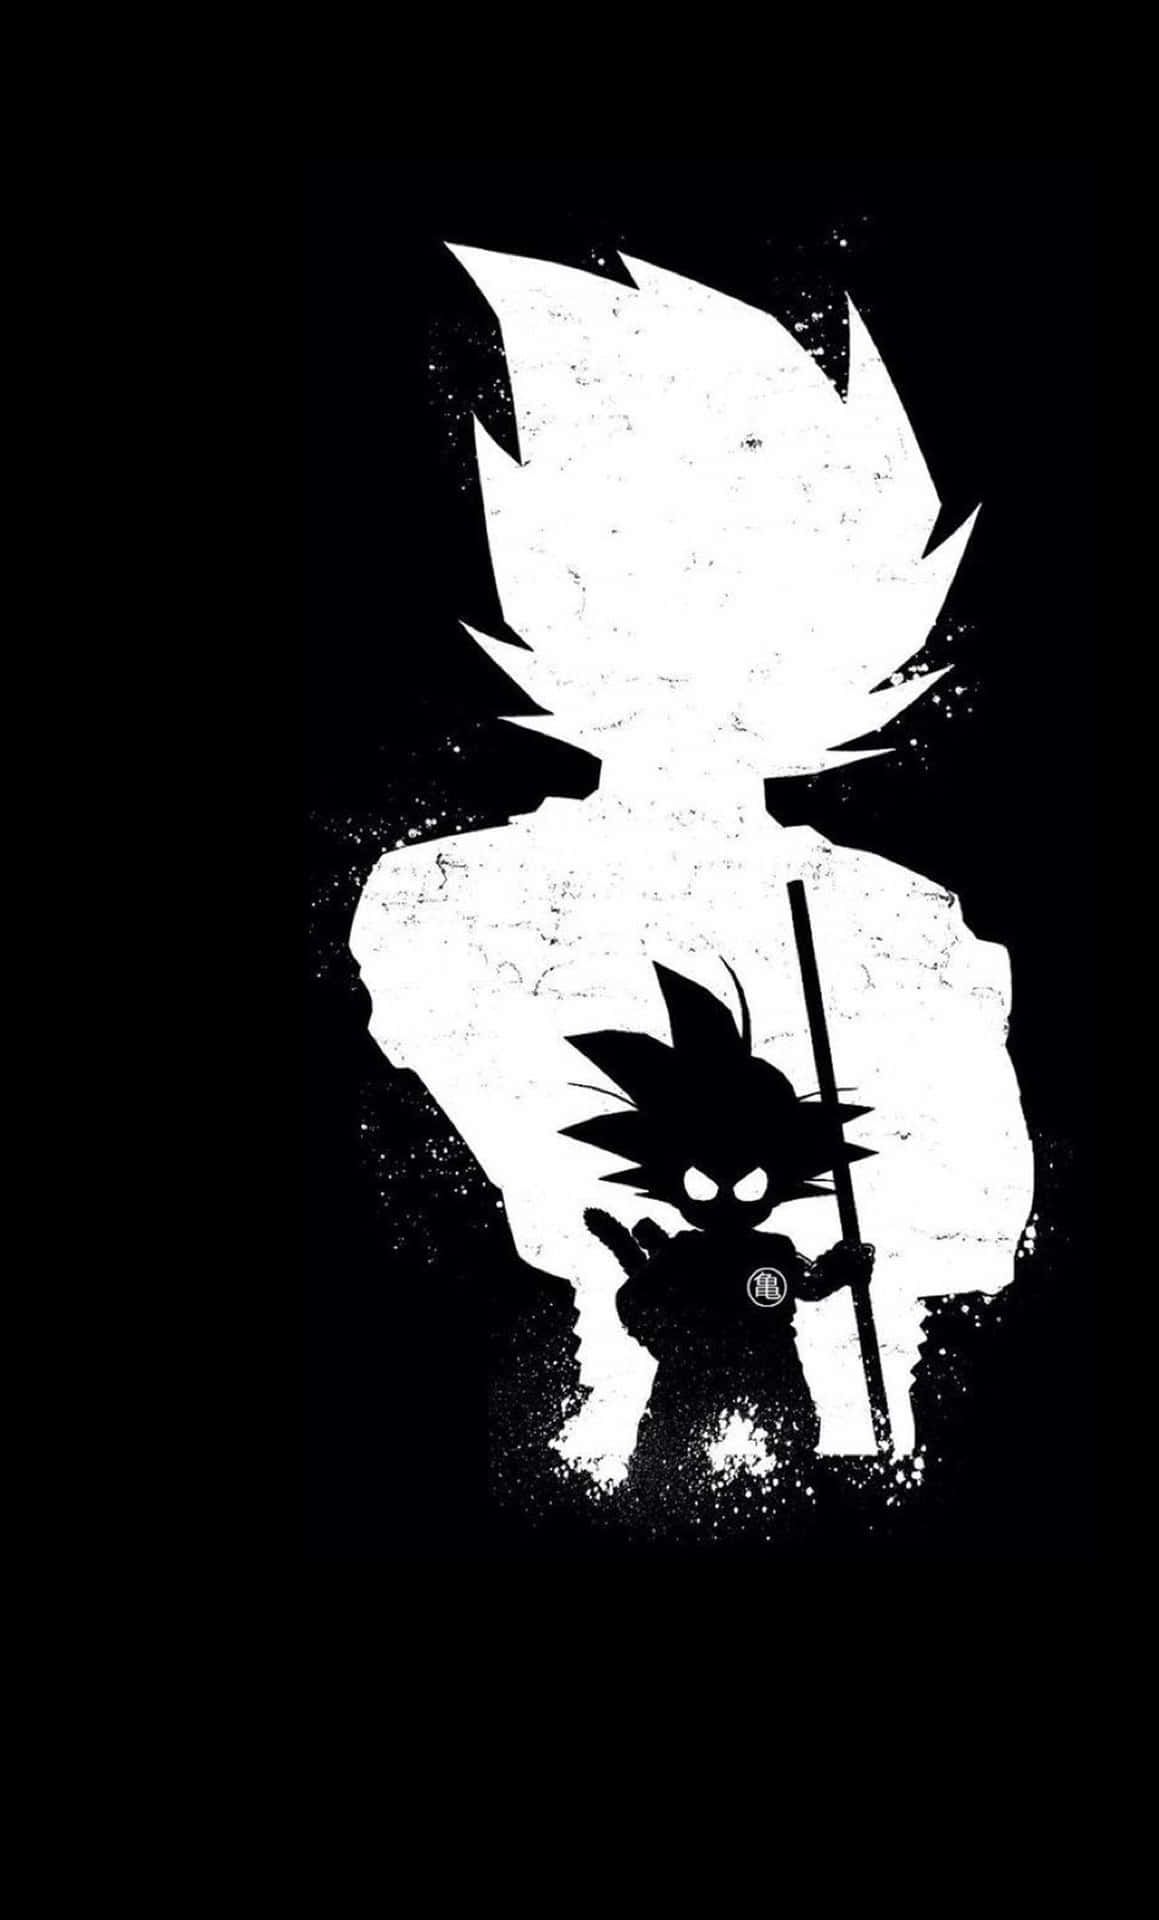 An anime black and white drawing of a figure in a reflective pose Wallpaper